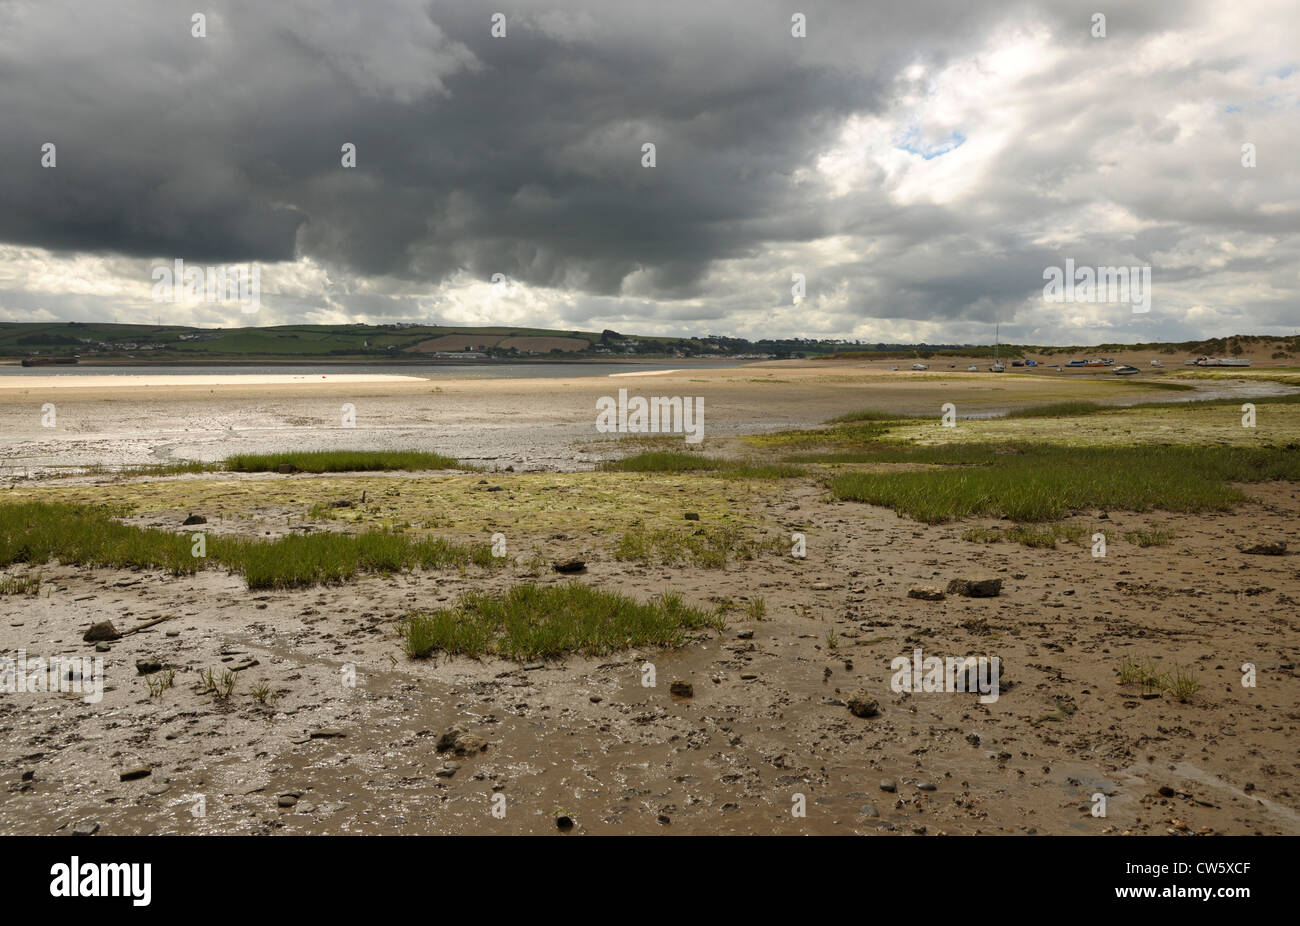 Dark clouds gather over the River Taw mudflats. North Devon. England. Estuary mudflats Contre jour image with dark storm clouds. Stock Photo